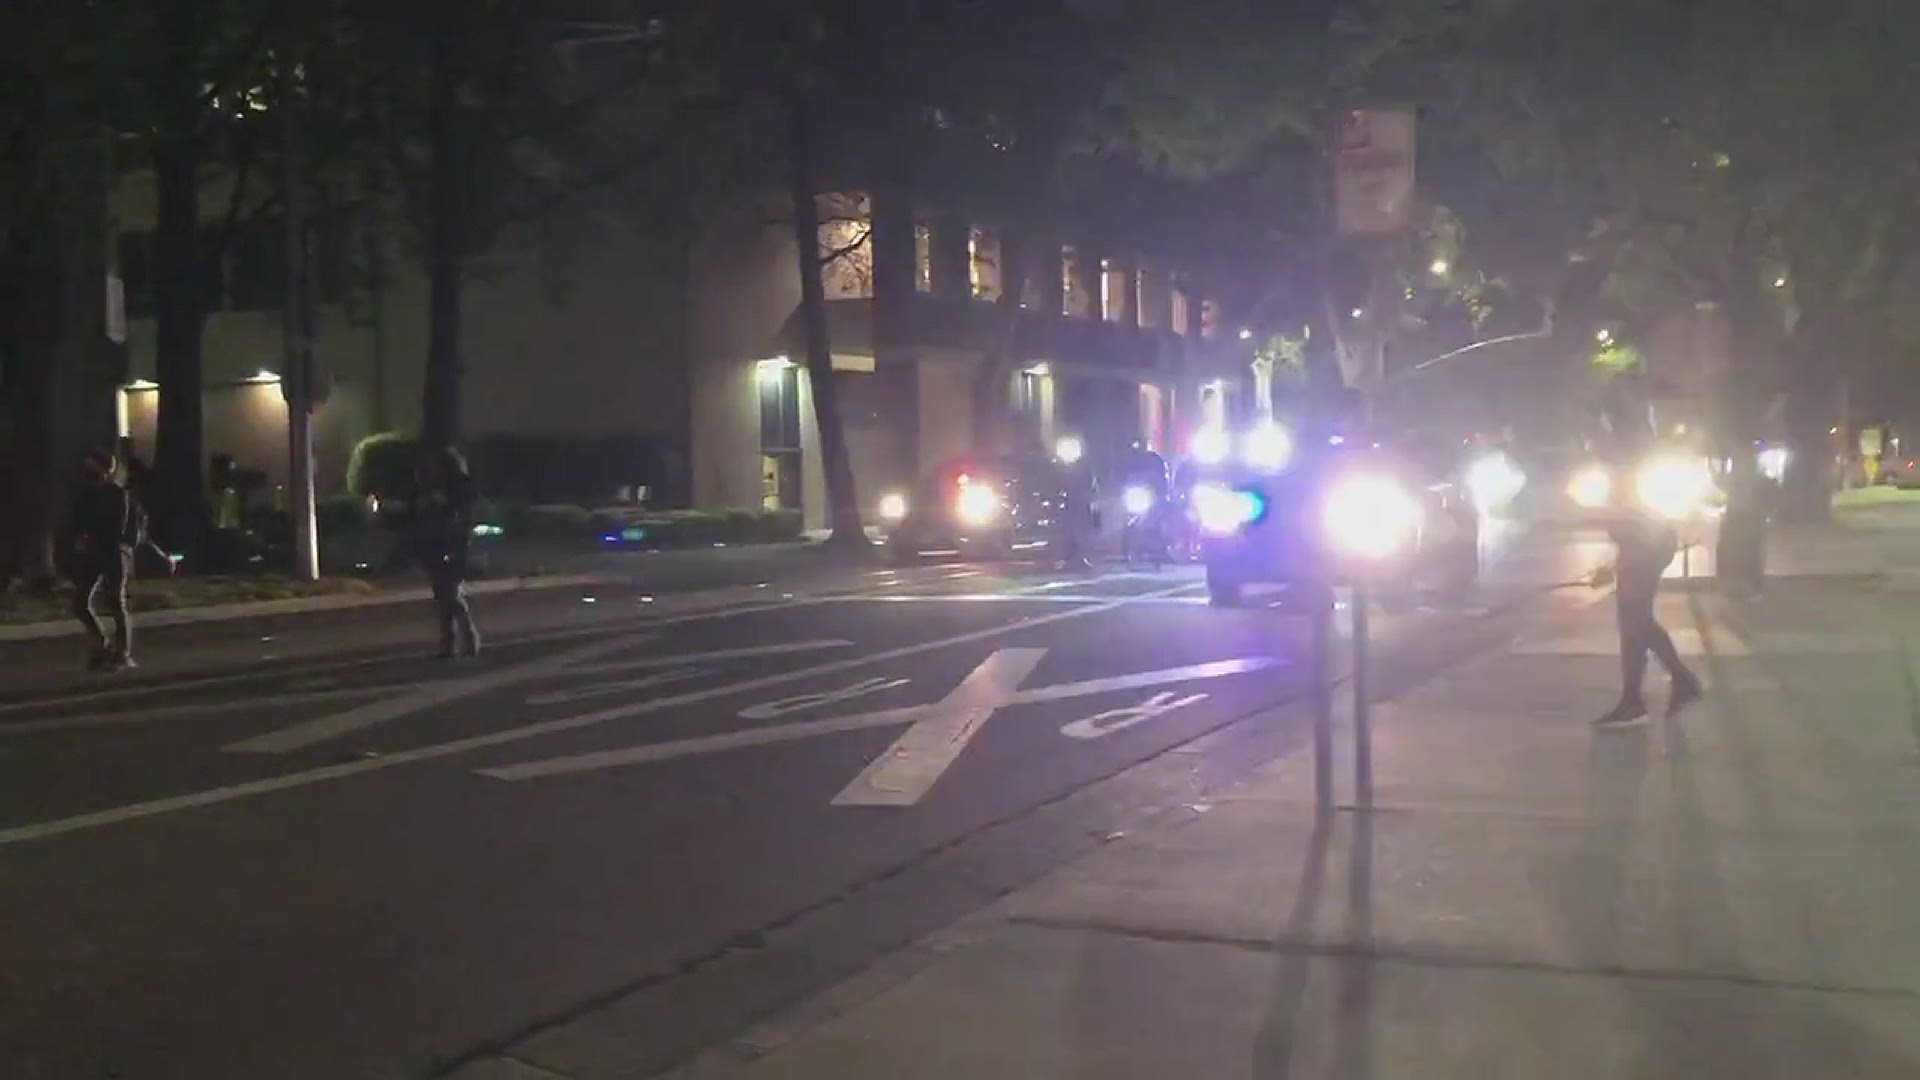 Just after 10:30 p.m. police tweeted that demonstrators have started to disperse.